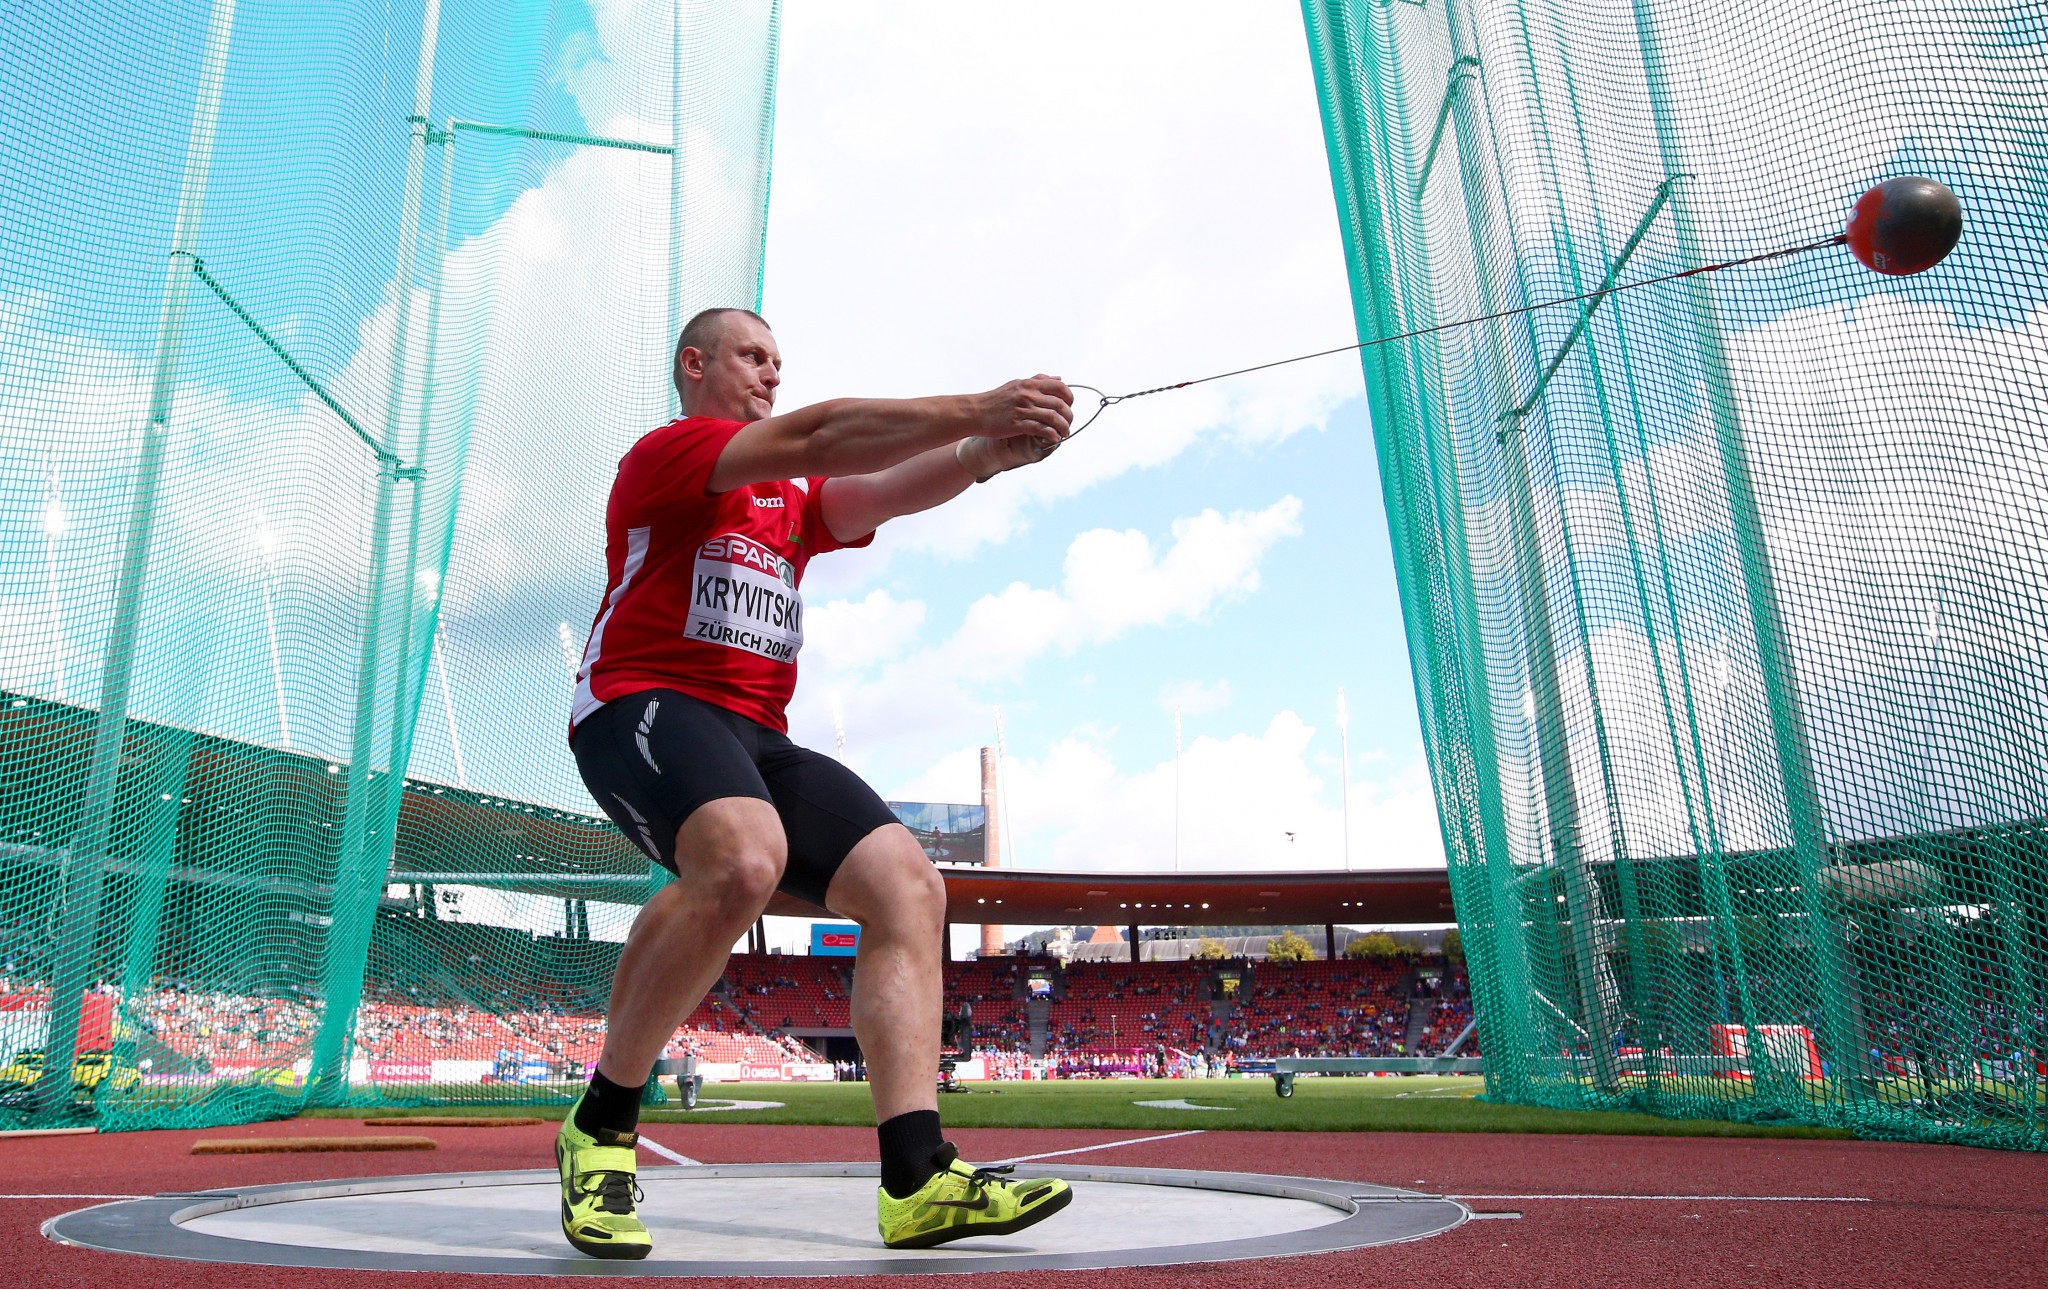 Hammer thrower Pavel Kryvitski has had further results disqualified by the AIU ©Getty Images